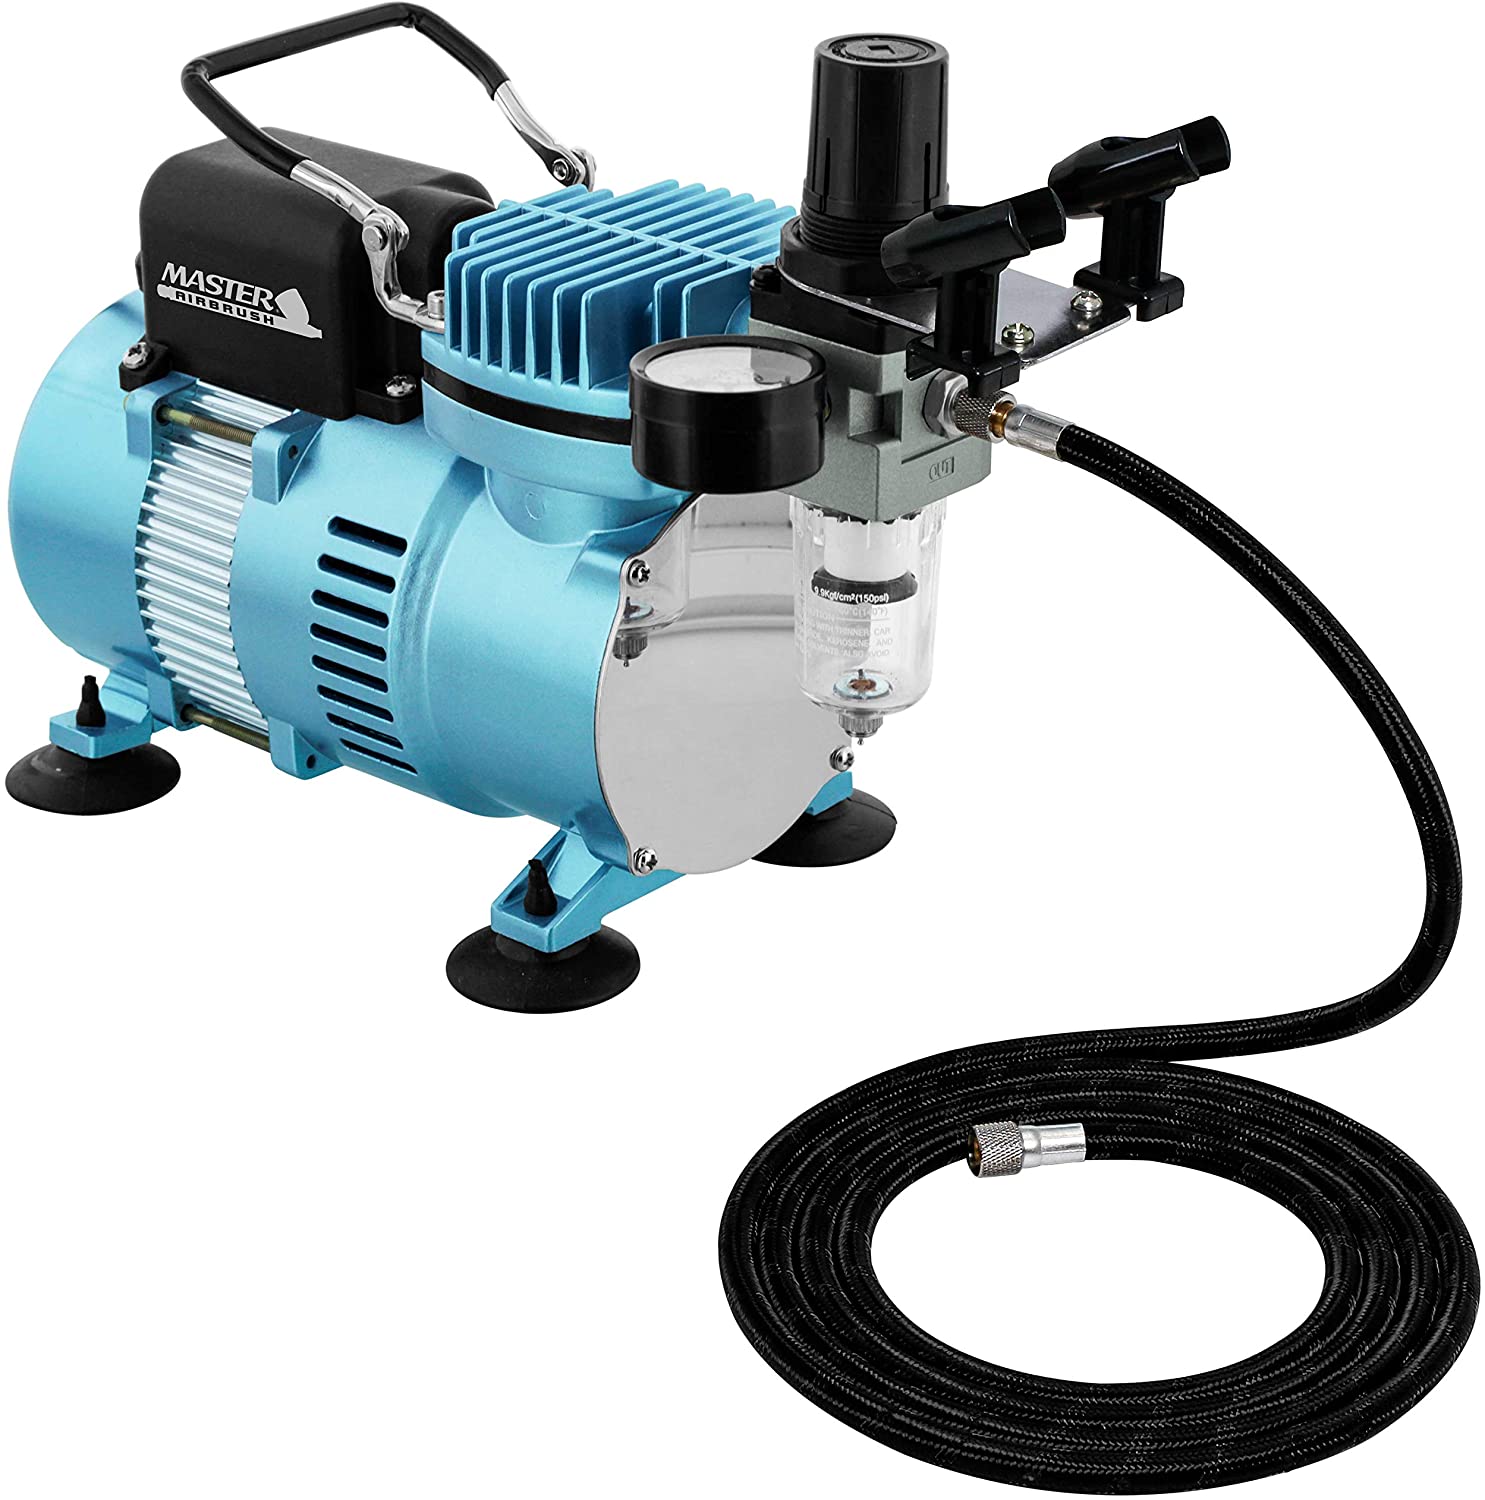  Master Airbrush 1/5 HP Cool Runner II Dual Fan Air Compressor  Kit Model TC-320 - Professional Single-Piston with 2 Cooling Fans, Longer  Running Time Without Overheating - Regulator Water Trap, Holder 